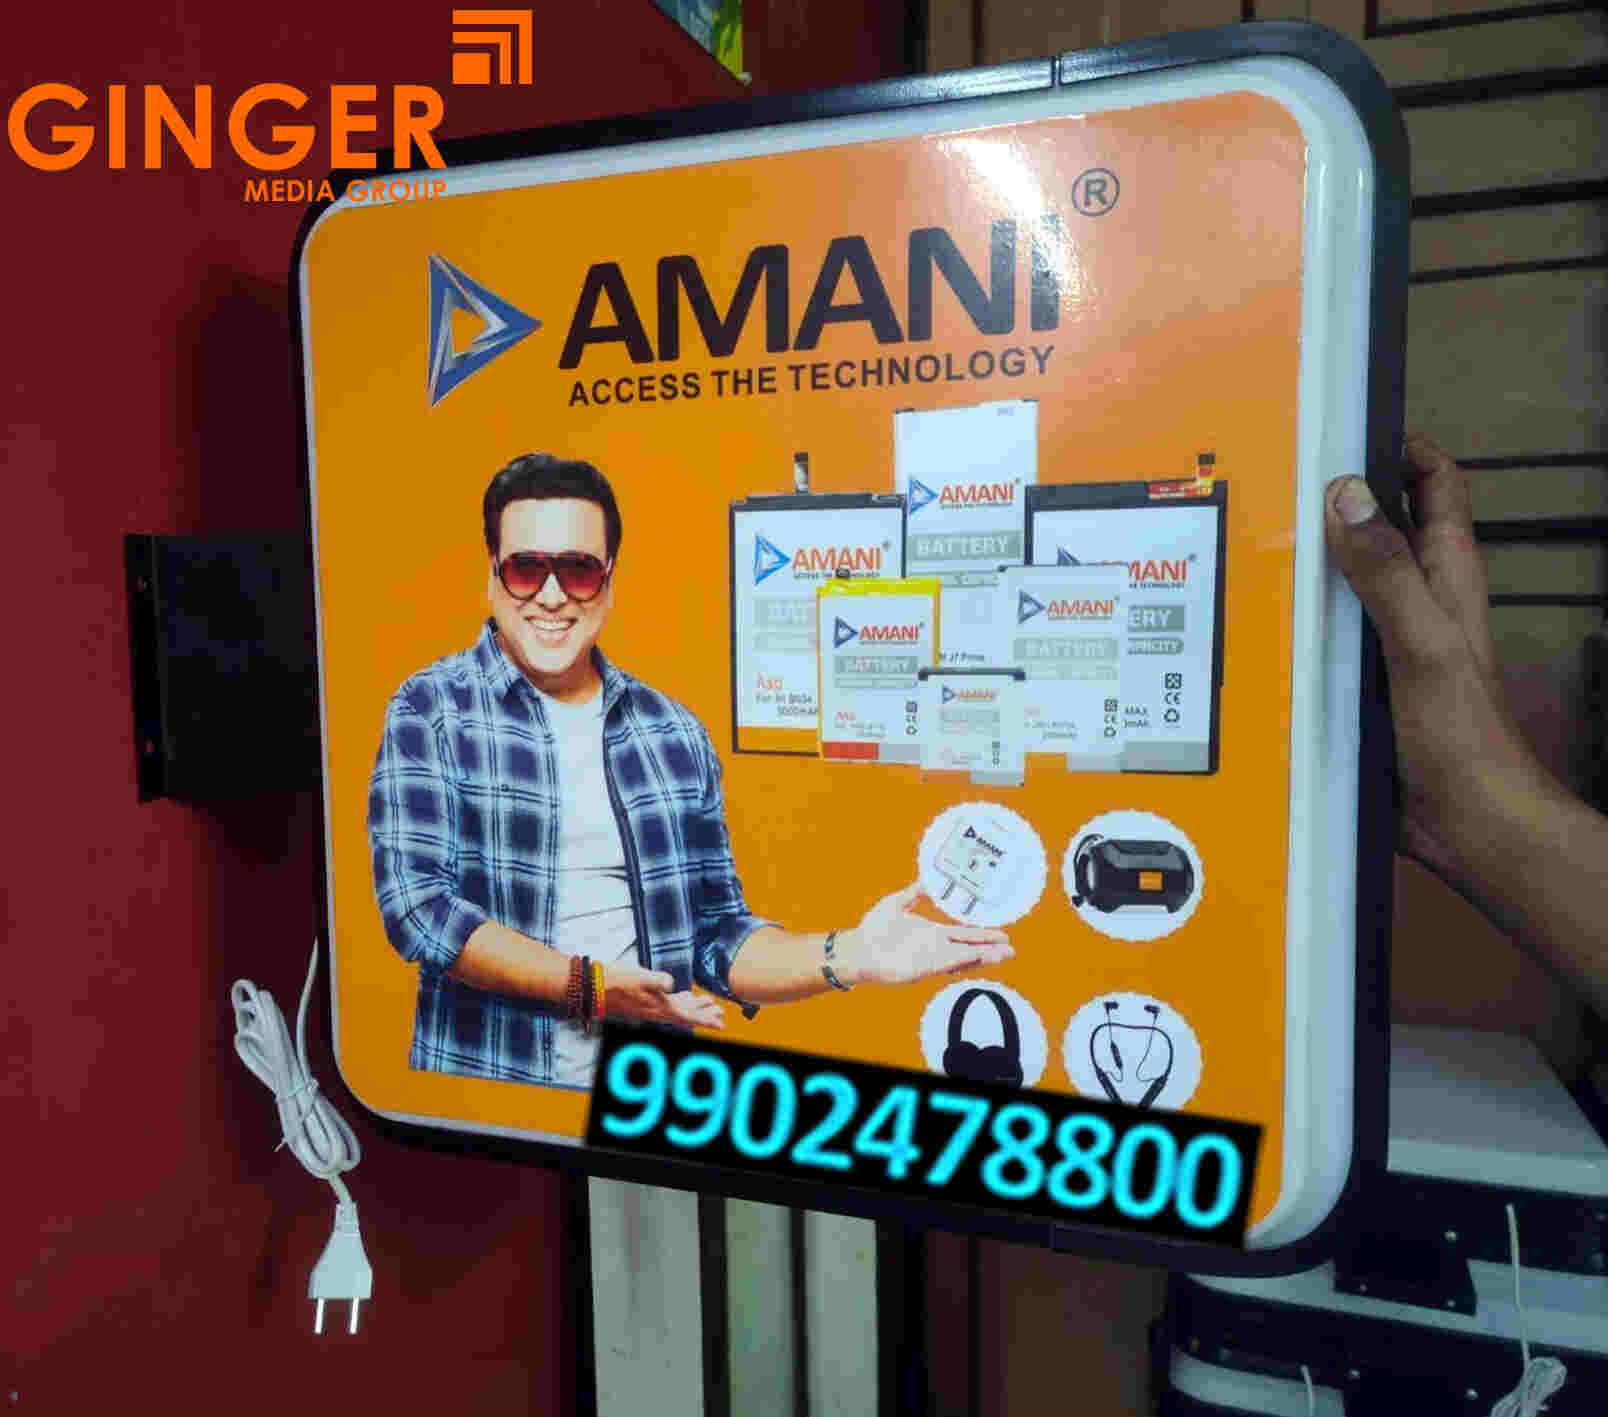 Flanges branding in India for AMANI